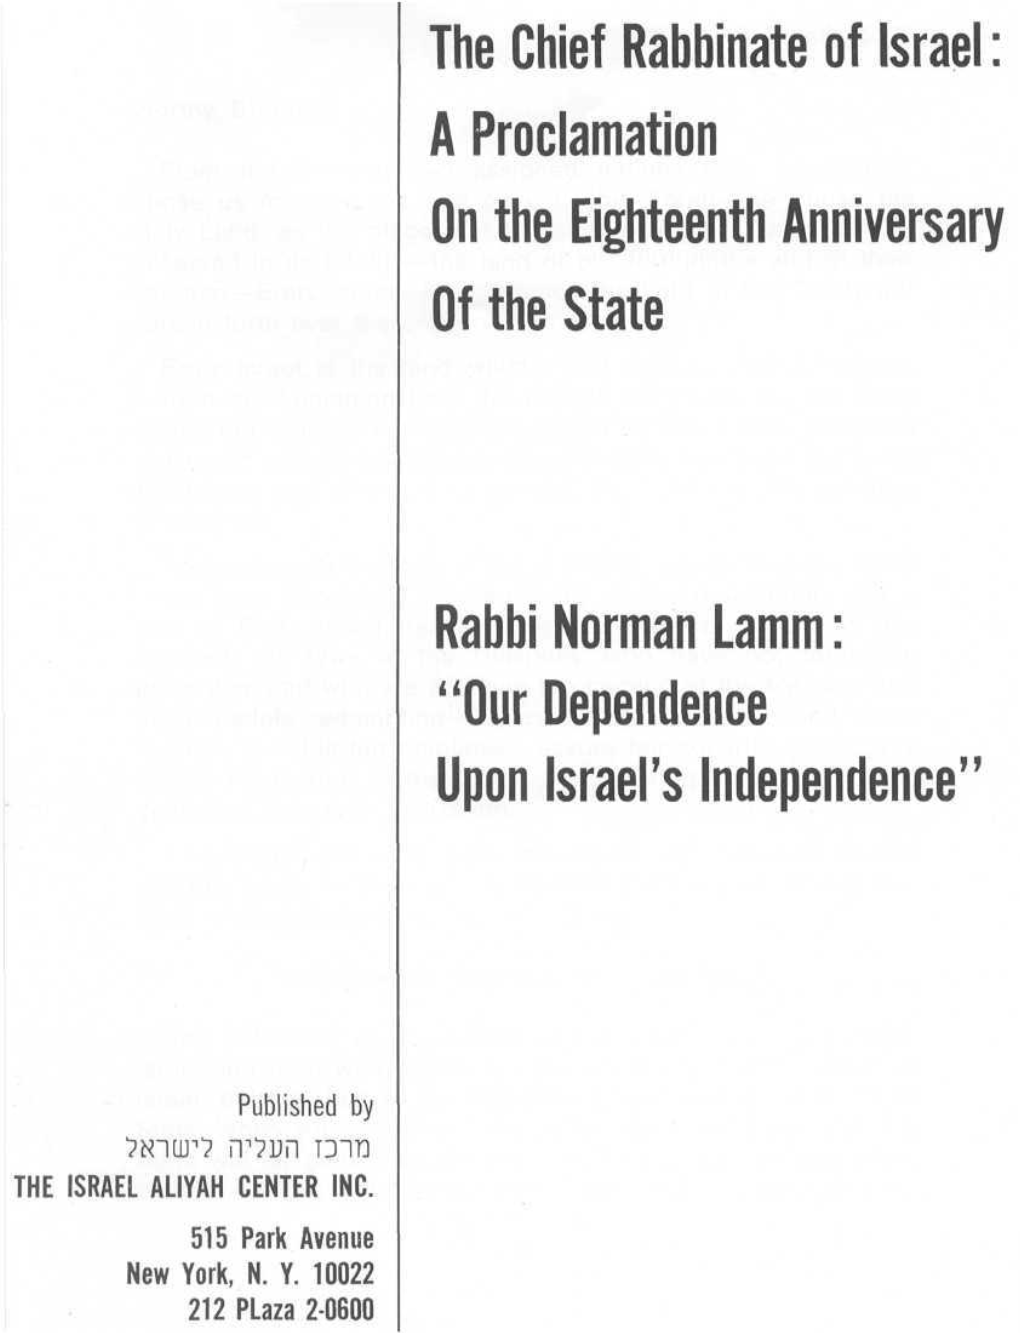 The Chief Rabbinate of Israel: a Proclamation on the Eighteenth Anniversary of the State Rabbi Norman Lamm: "Our Dependence